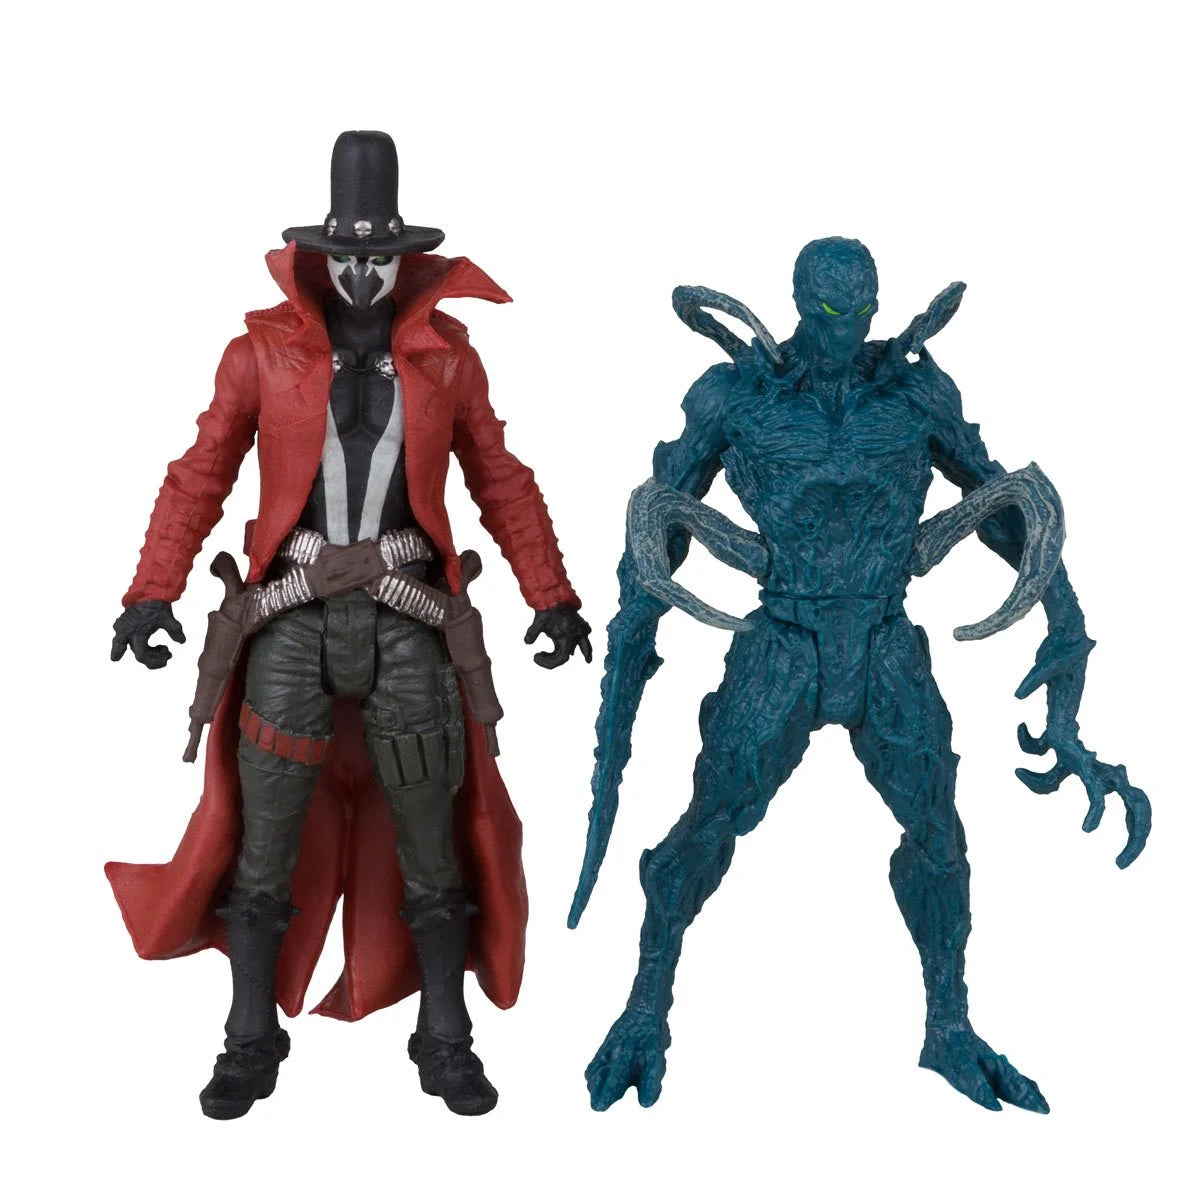 Spawn Page Punchers - WV1 - Gunslinger and Auger Action Figure (Spawn #309) - 3IN Figure with Comic 2PK